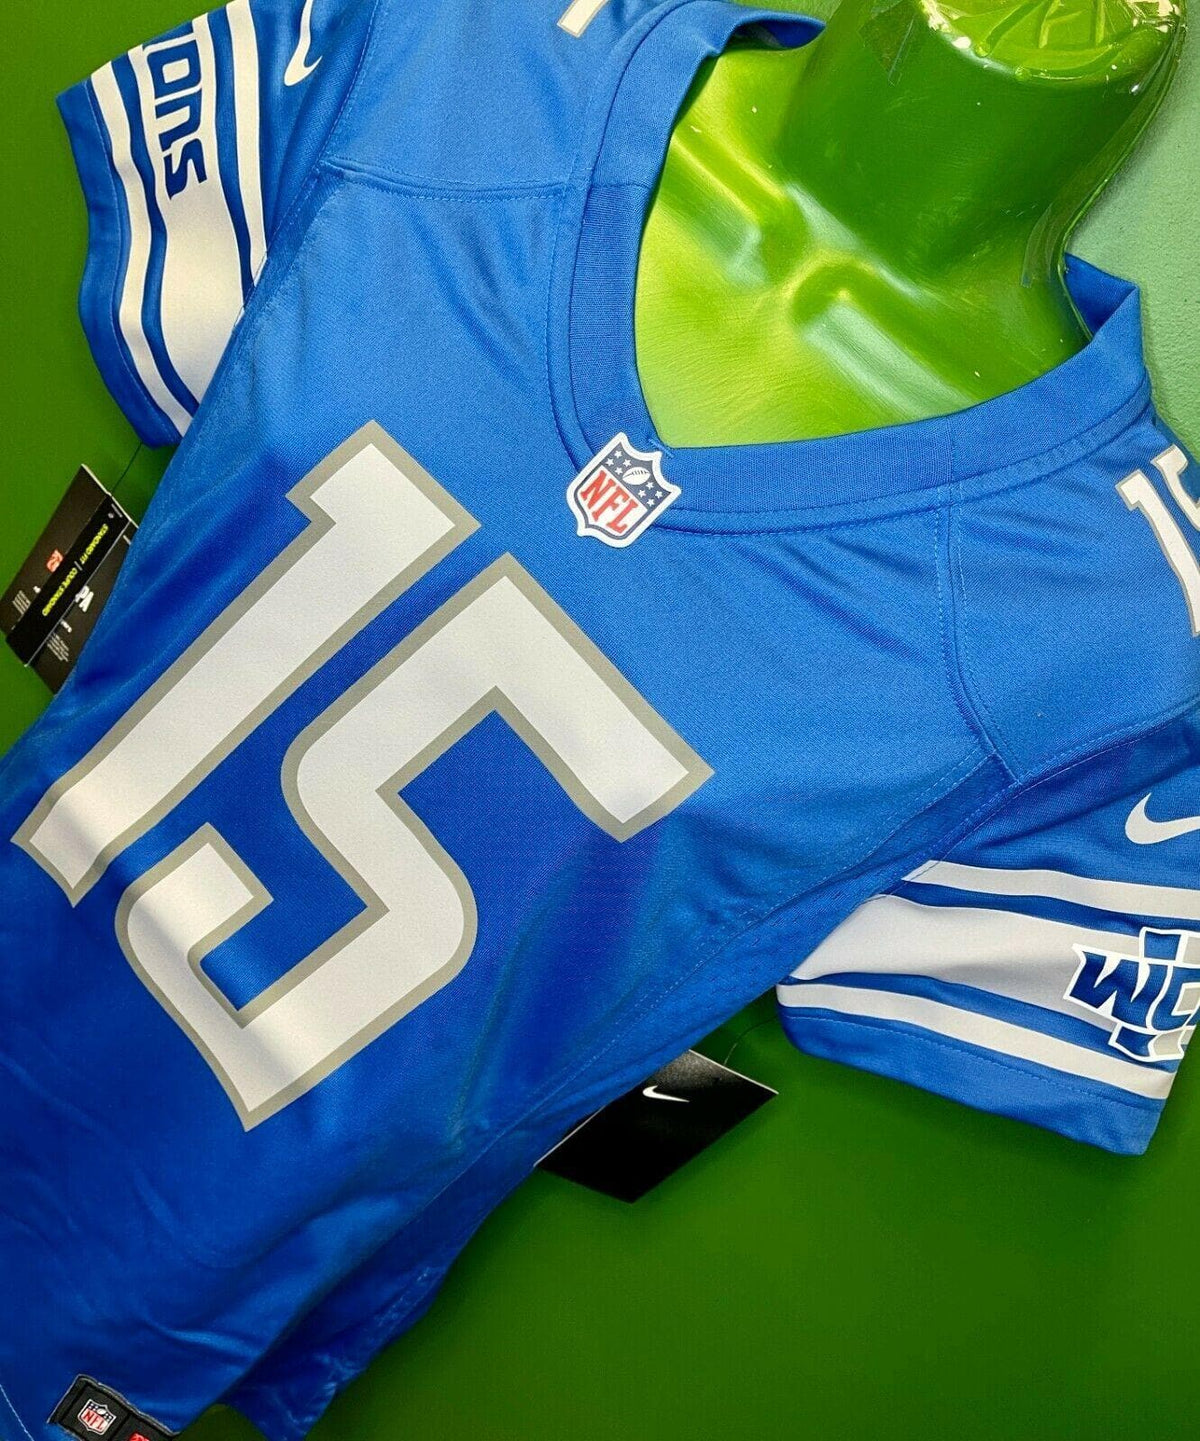 NFL Detroit Lions Golden Tate #15 Game Jersey Women's Small NWT